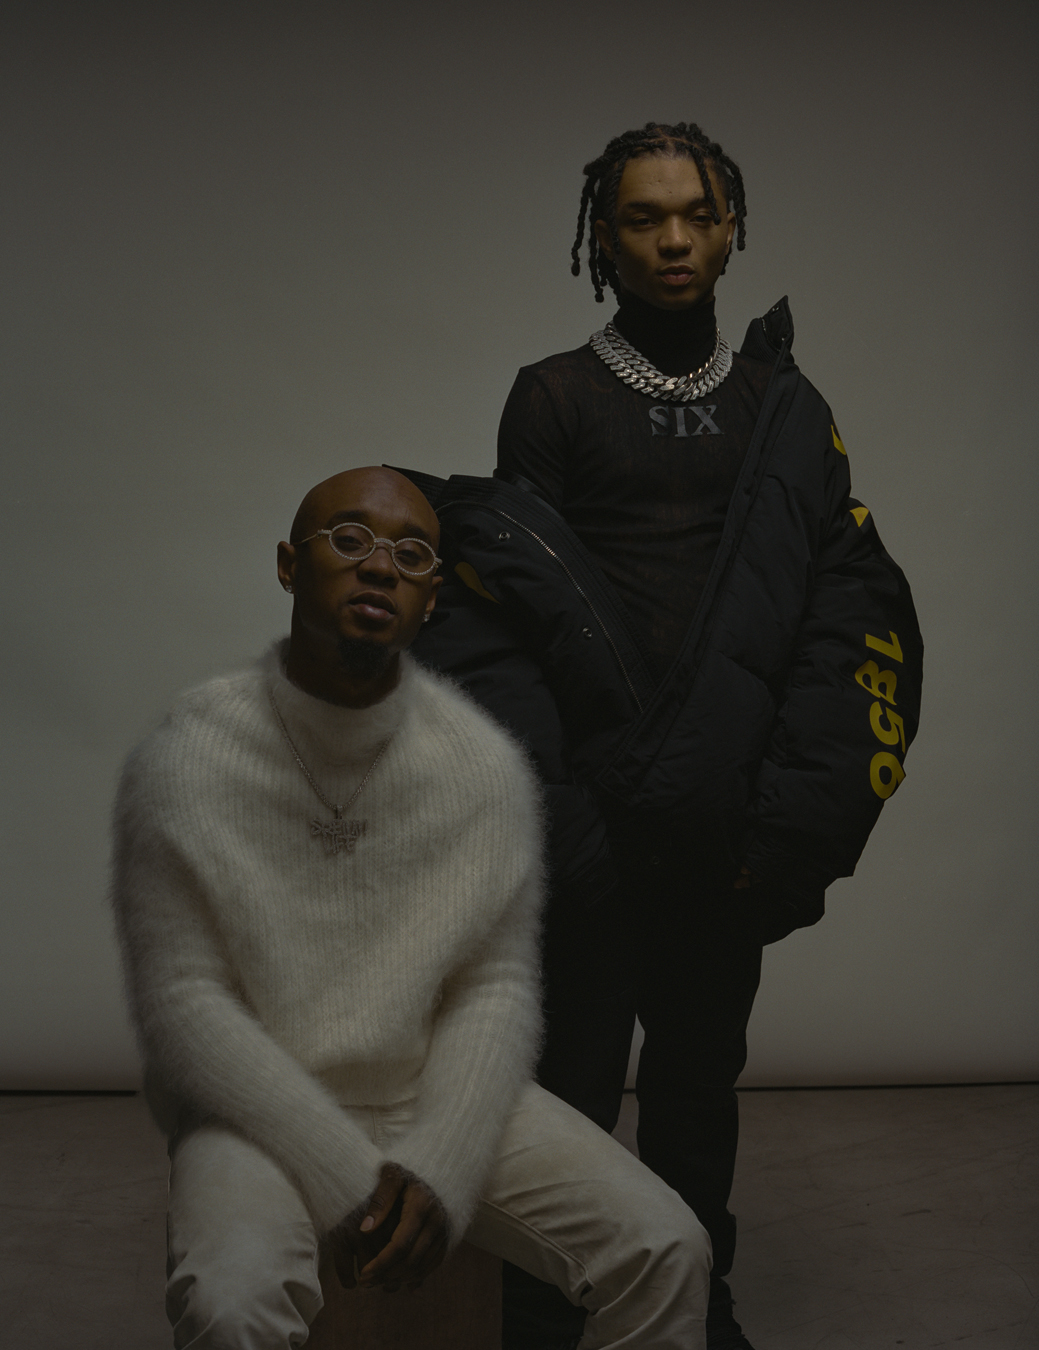 Rae Sremmurd photographed by  Steven Traylor for  i-D’s The Royalty Issue, no. 370, Winter 2022